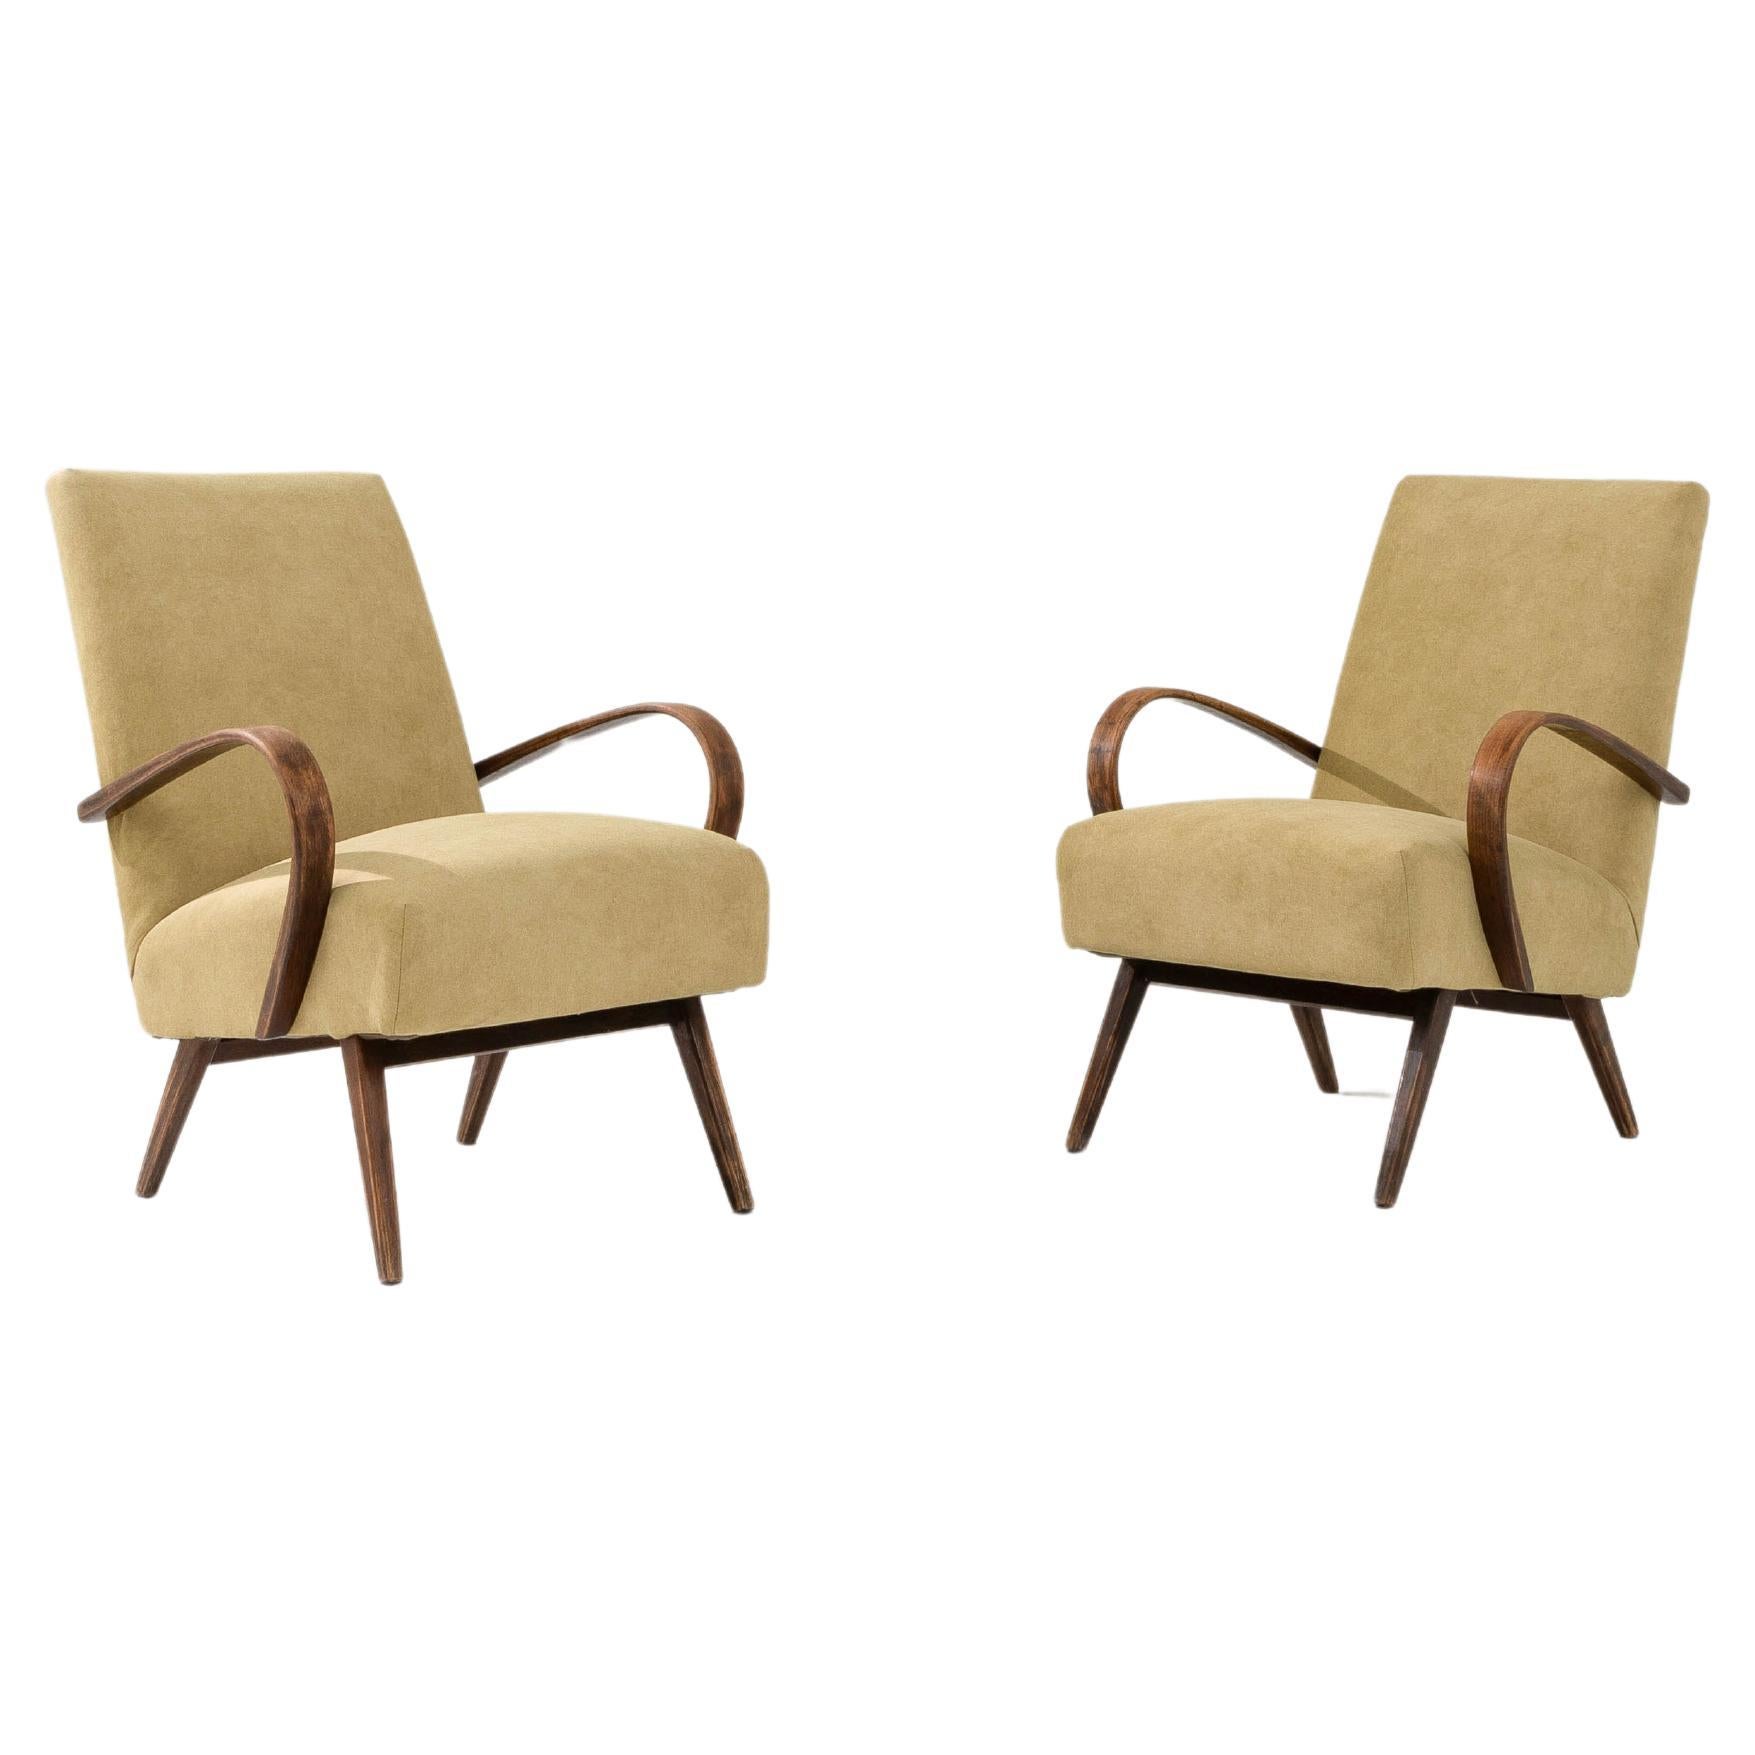 1950s Czech Upholstered Armchairs, a Pair